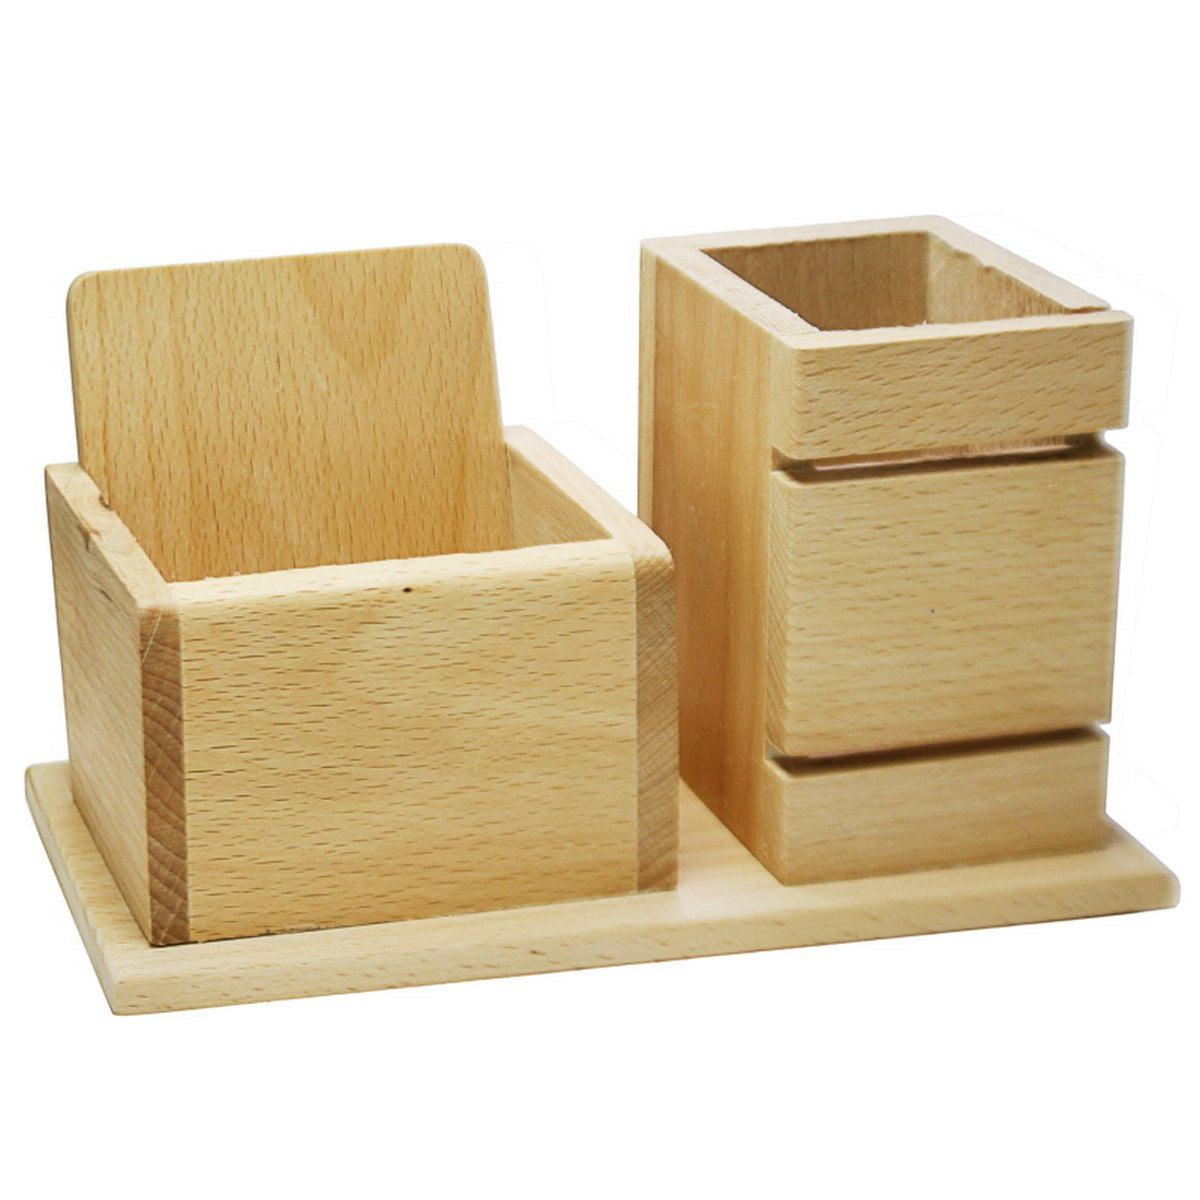 Light Brown Multipurpose Wooden Pen Stand - For Corporate Gifting, Events Promotional Freebie